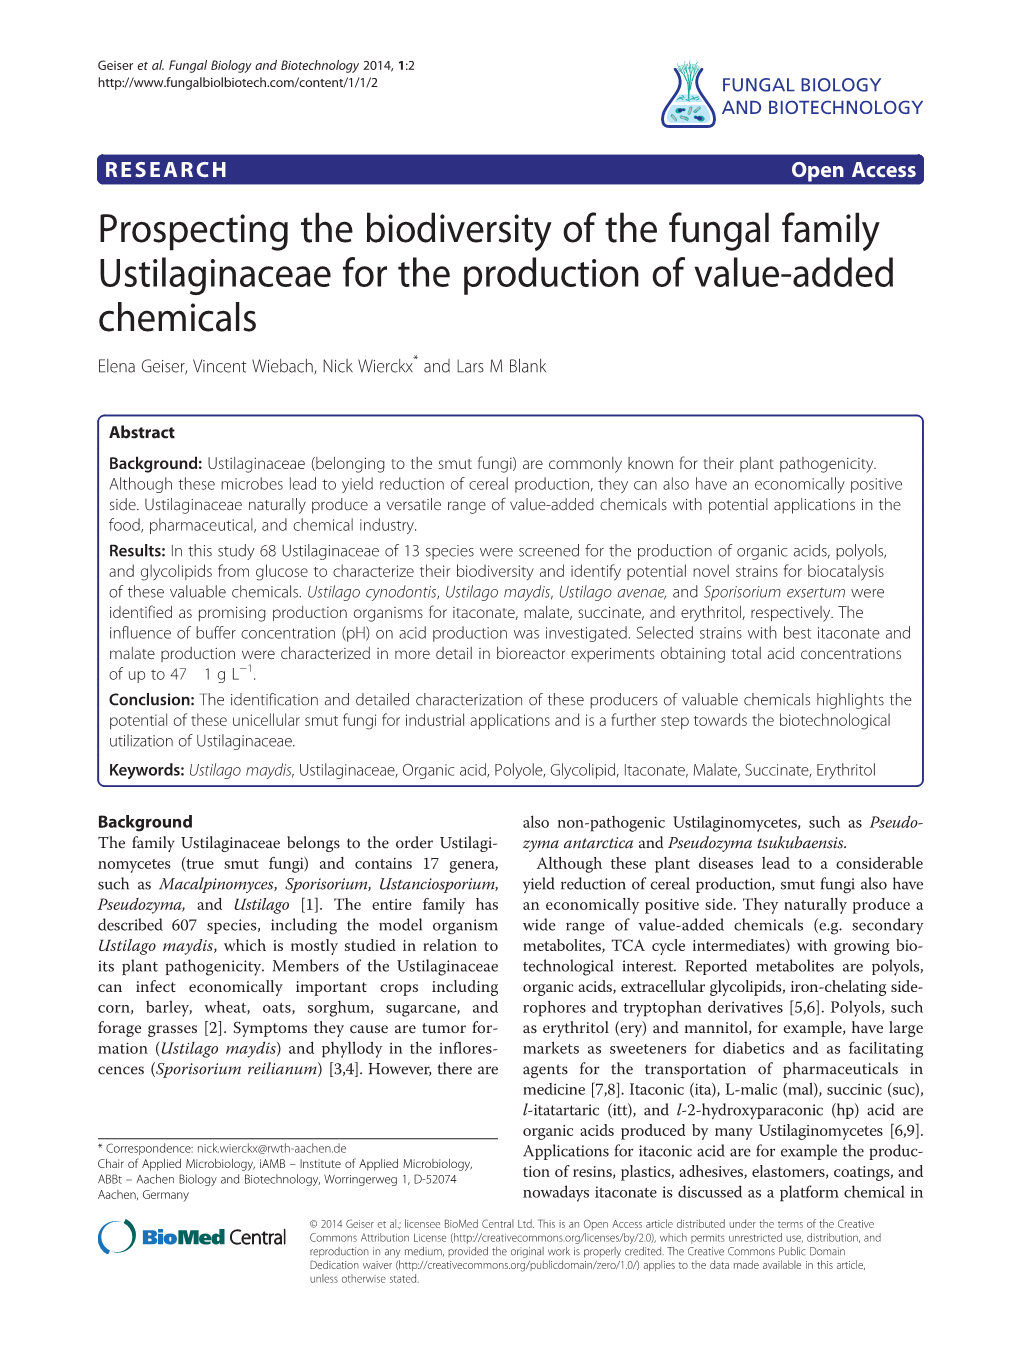 Prospecting the Biodiversity of the Fungal Family Ustilaginaceae for The